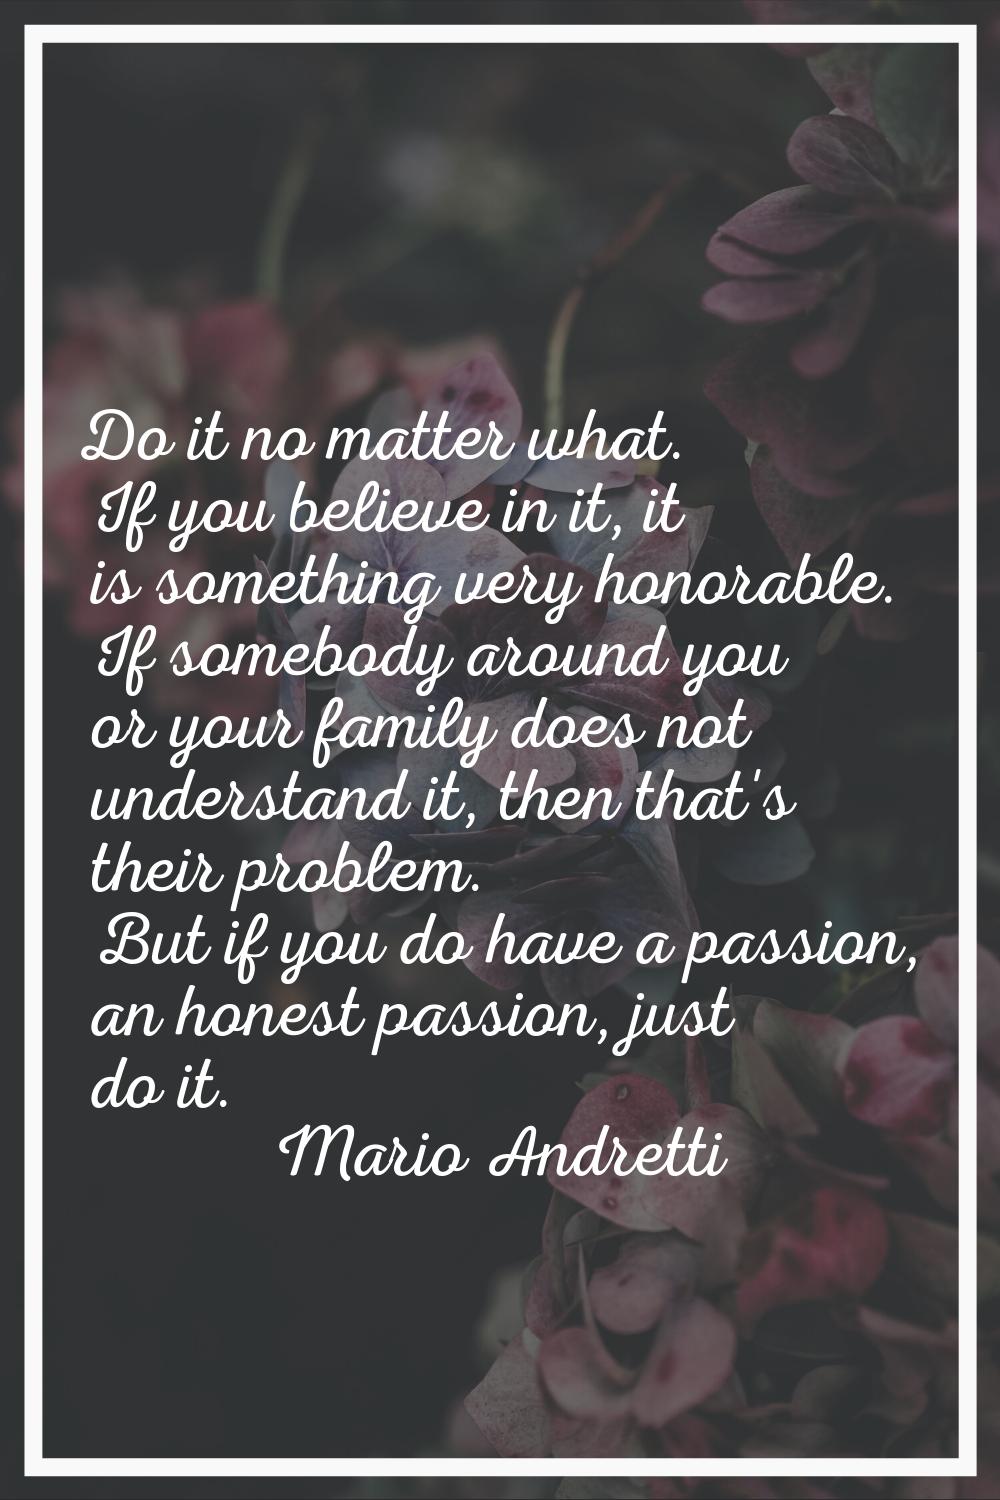 Do it no matter what. If you believe in it, it is something very honorable. If somebody around you 